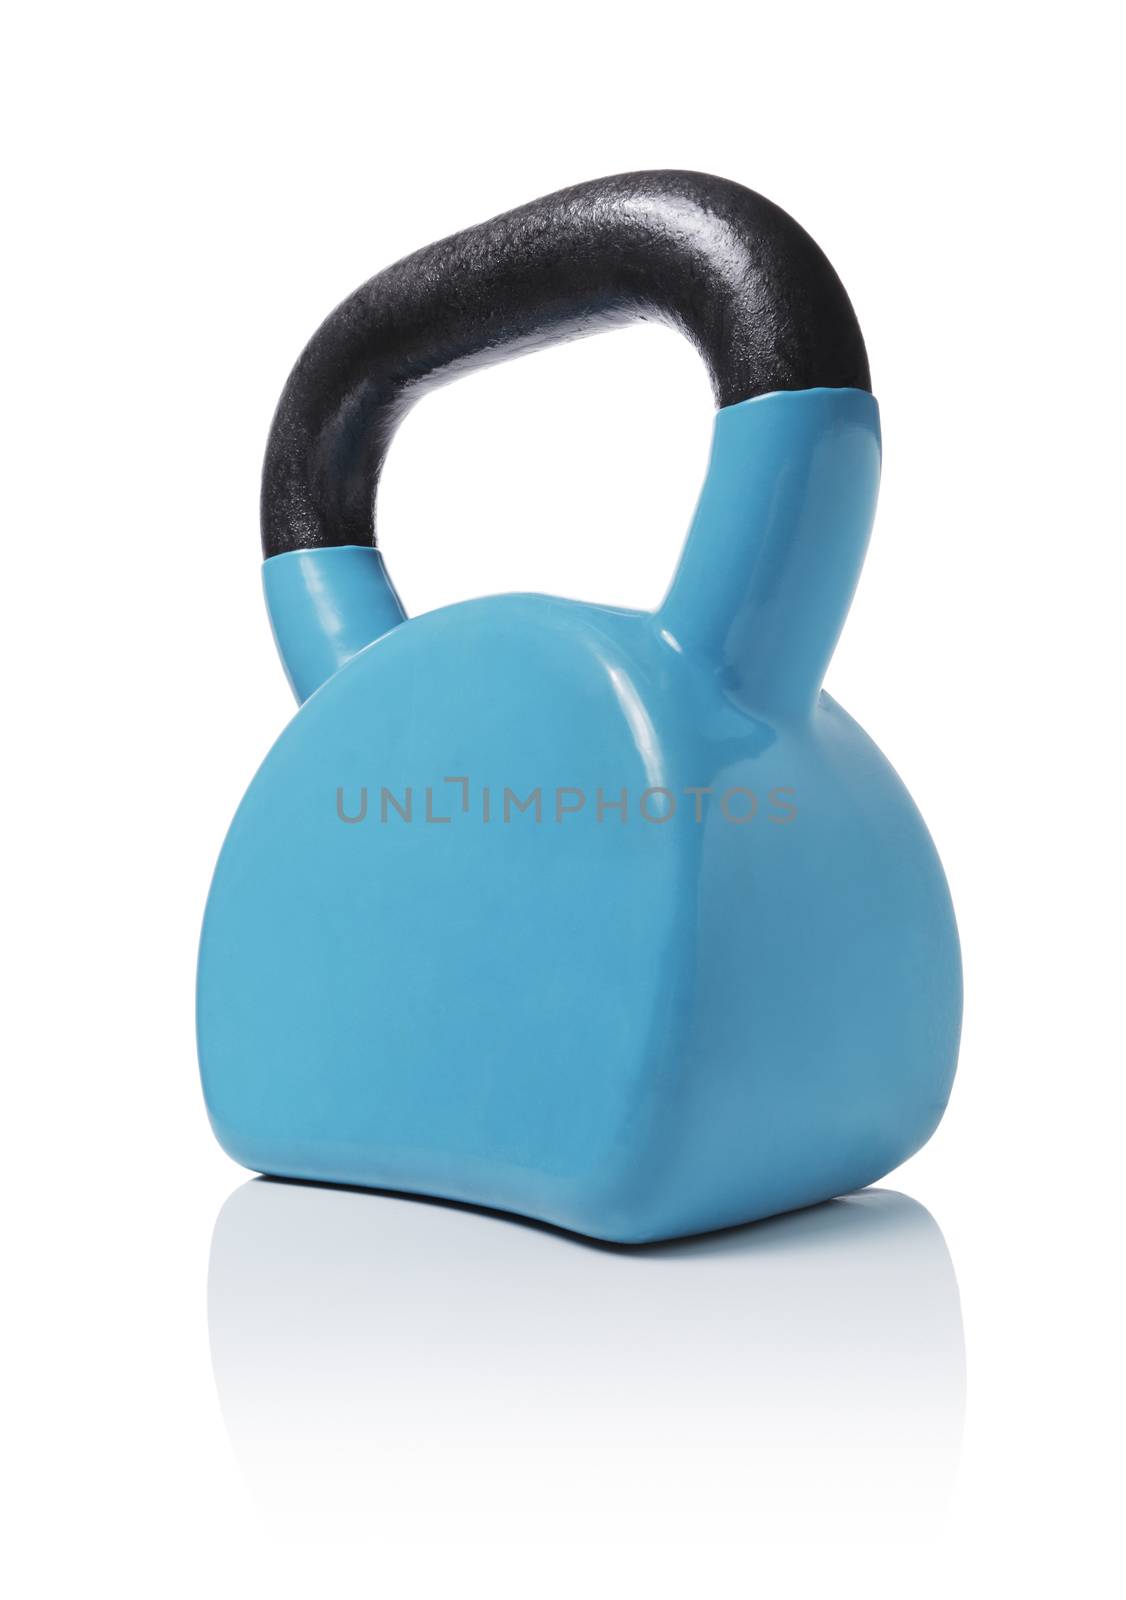 Modern ergonomic vinyl coated kettlebell isolated on white with natural reflection.